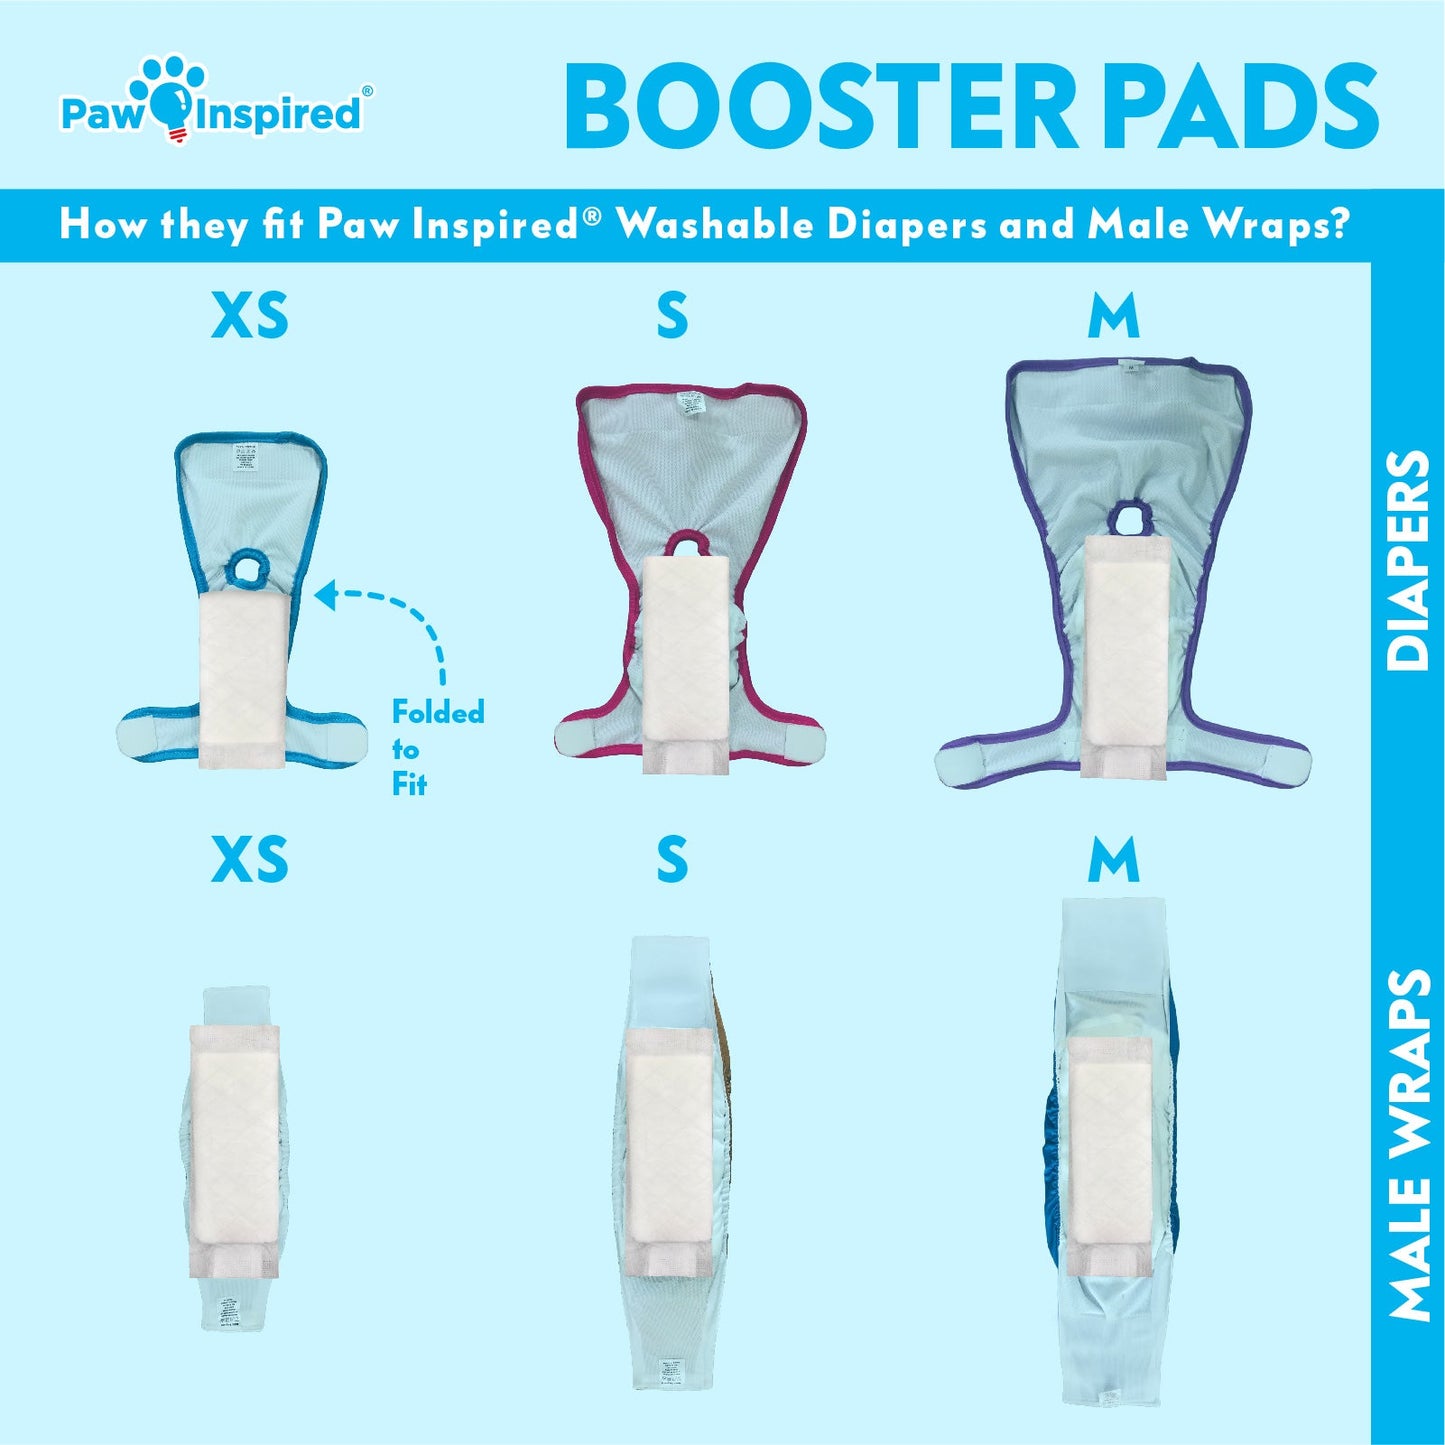 Disposable Booster Pads for Dog Diapers and Male Wraps